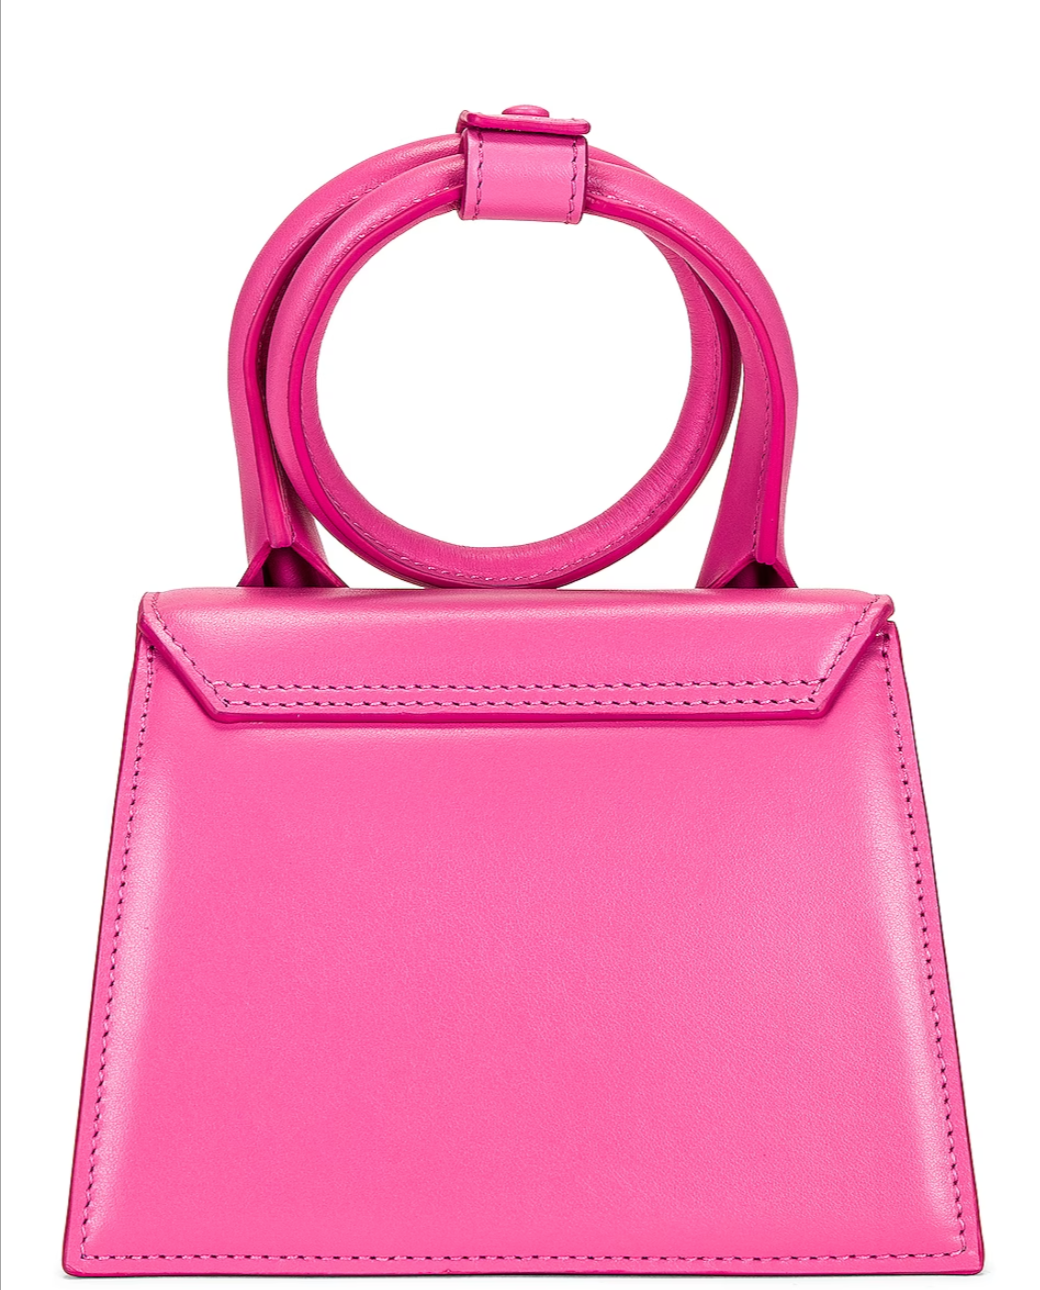 Jacquemus Le Chiquito Noeud Leather Bag